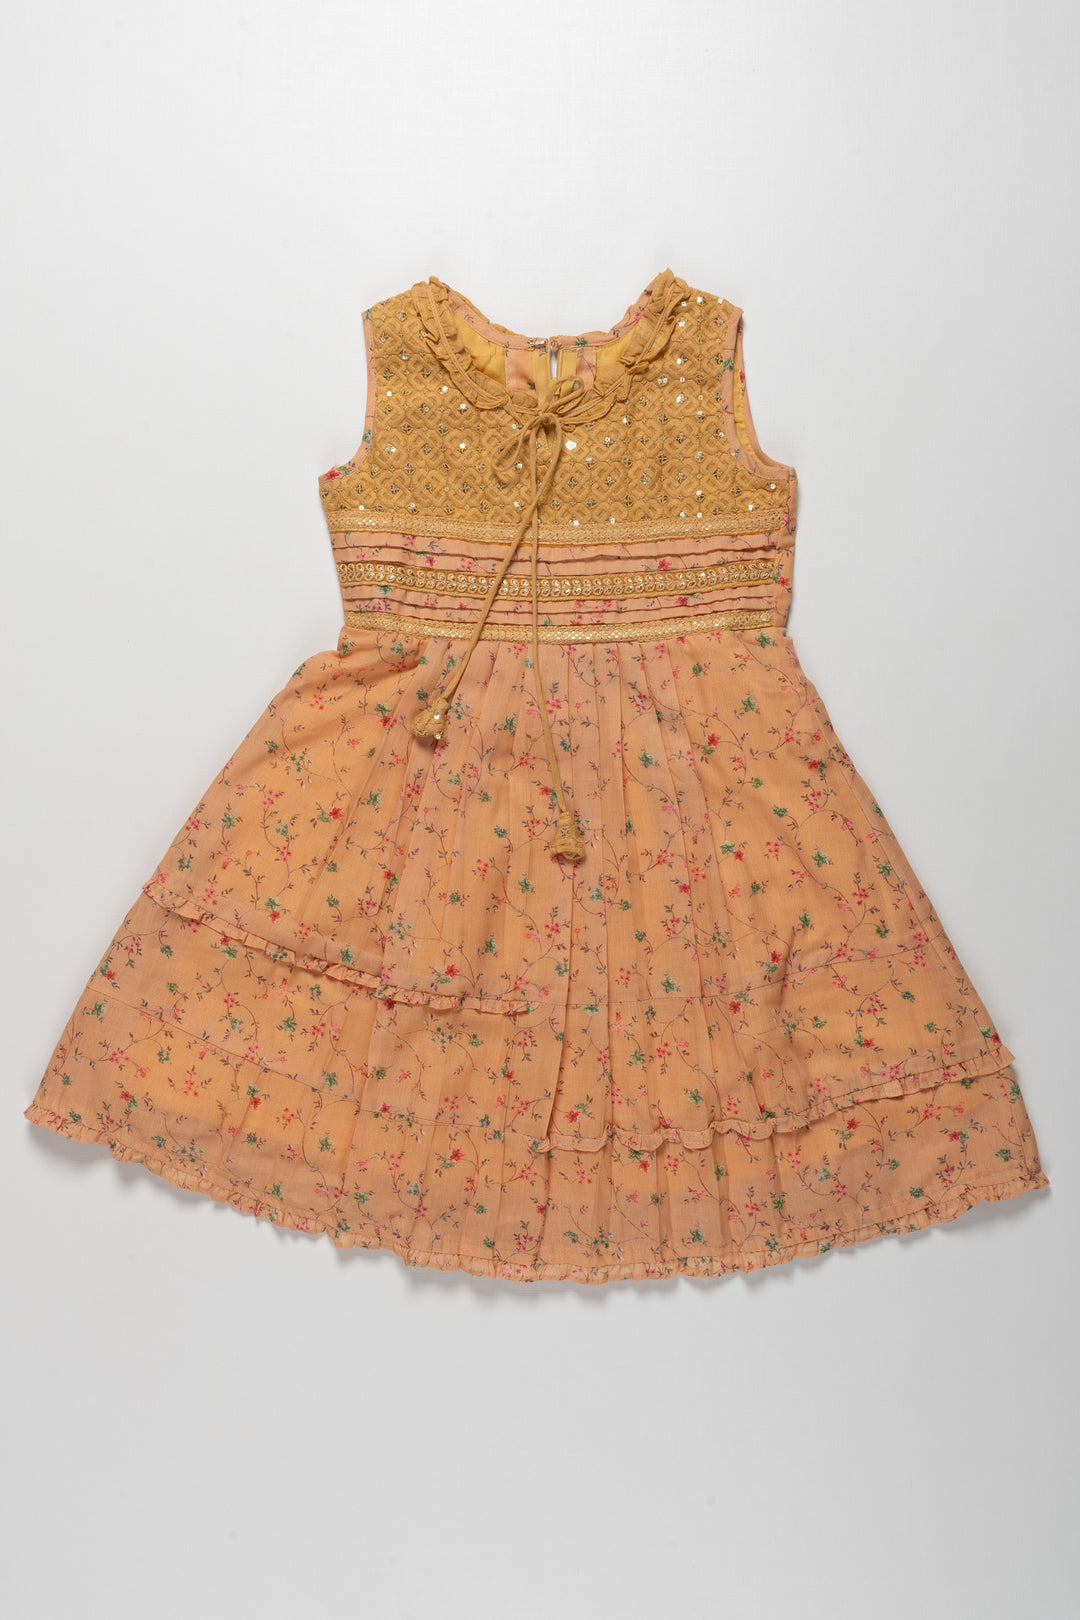 The Nesavu Girls Cotton Frock Charming Peach Girls Cotton Frock with Floral Print - Ideal for Summer Outings Nesavu 22 (4Y) / Orange / Poly Crepe GFC1156C-22 Charming Peach Girls Cotton Frock with Floral Print | Ideal for Summer Outings | The Nesavu